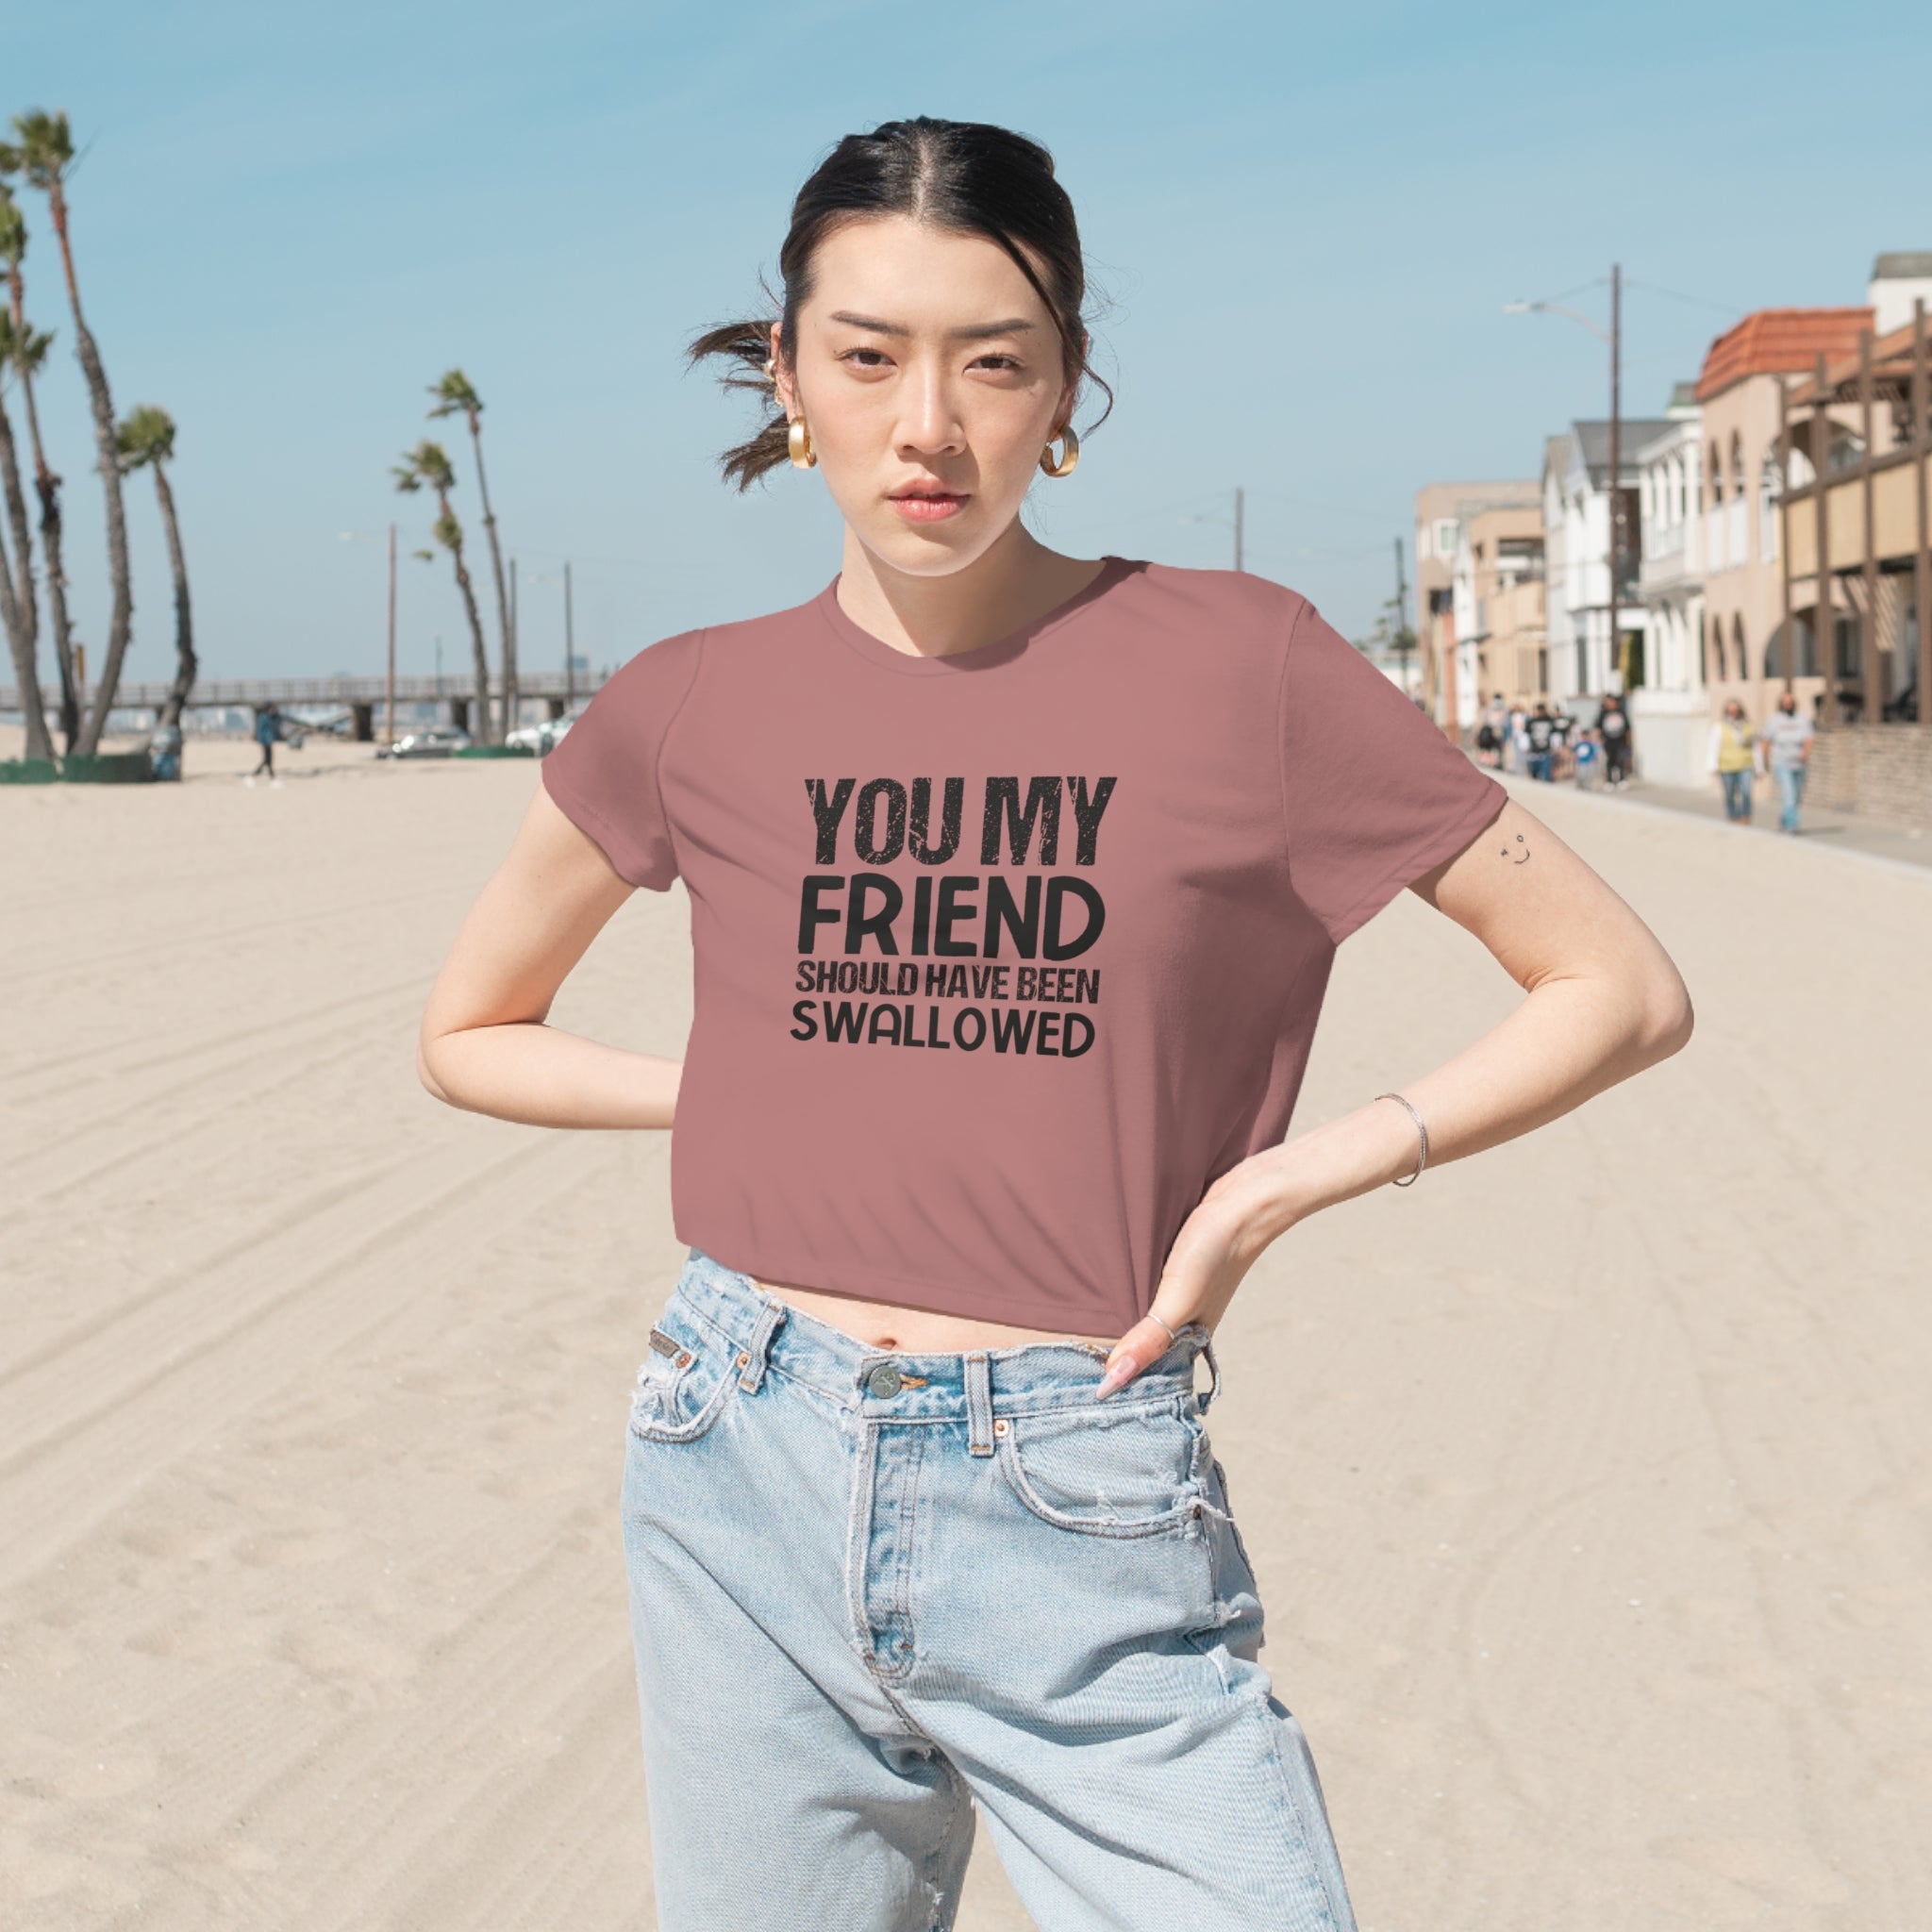 👚 Chic and Comfortable: Crafted from soft, flowy fabric, this cropped tee is designed for fashion-forward comfort. Its breezy and lightweight feel makes it ideal for hot summer days, casual outings, or whenever you want to add a playful touch to your look.